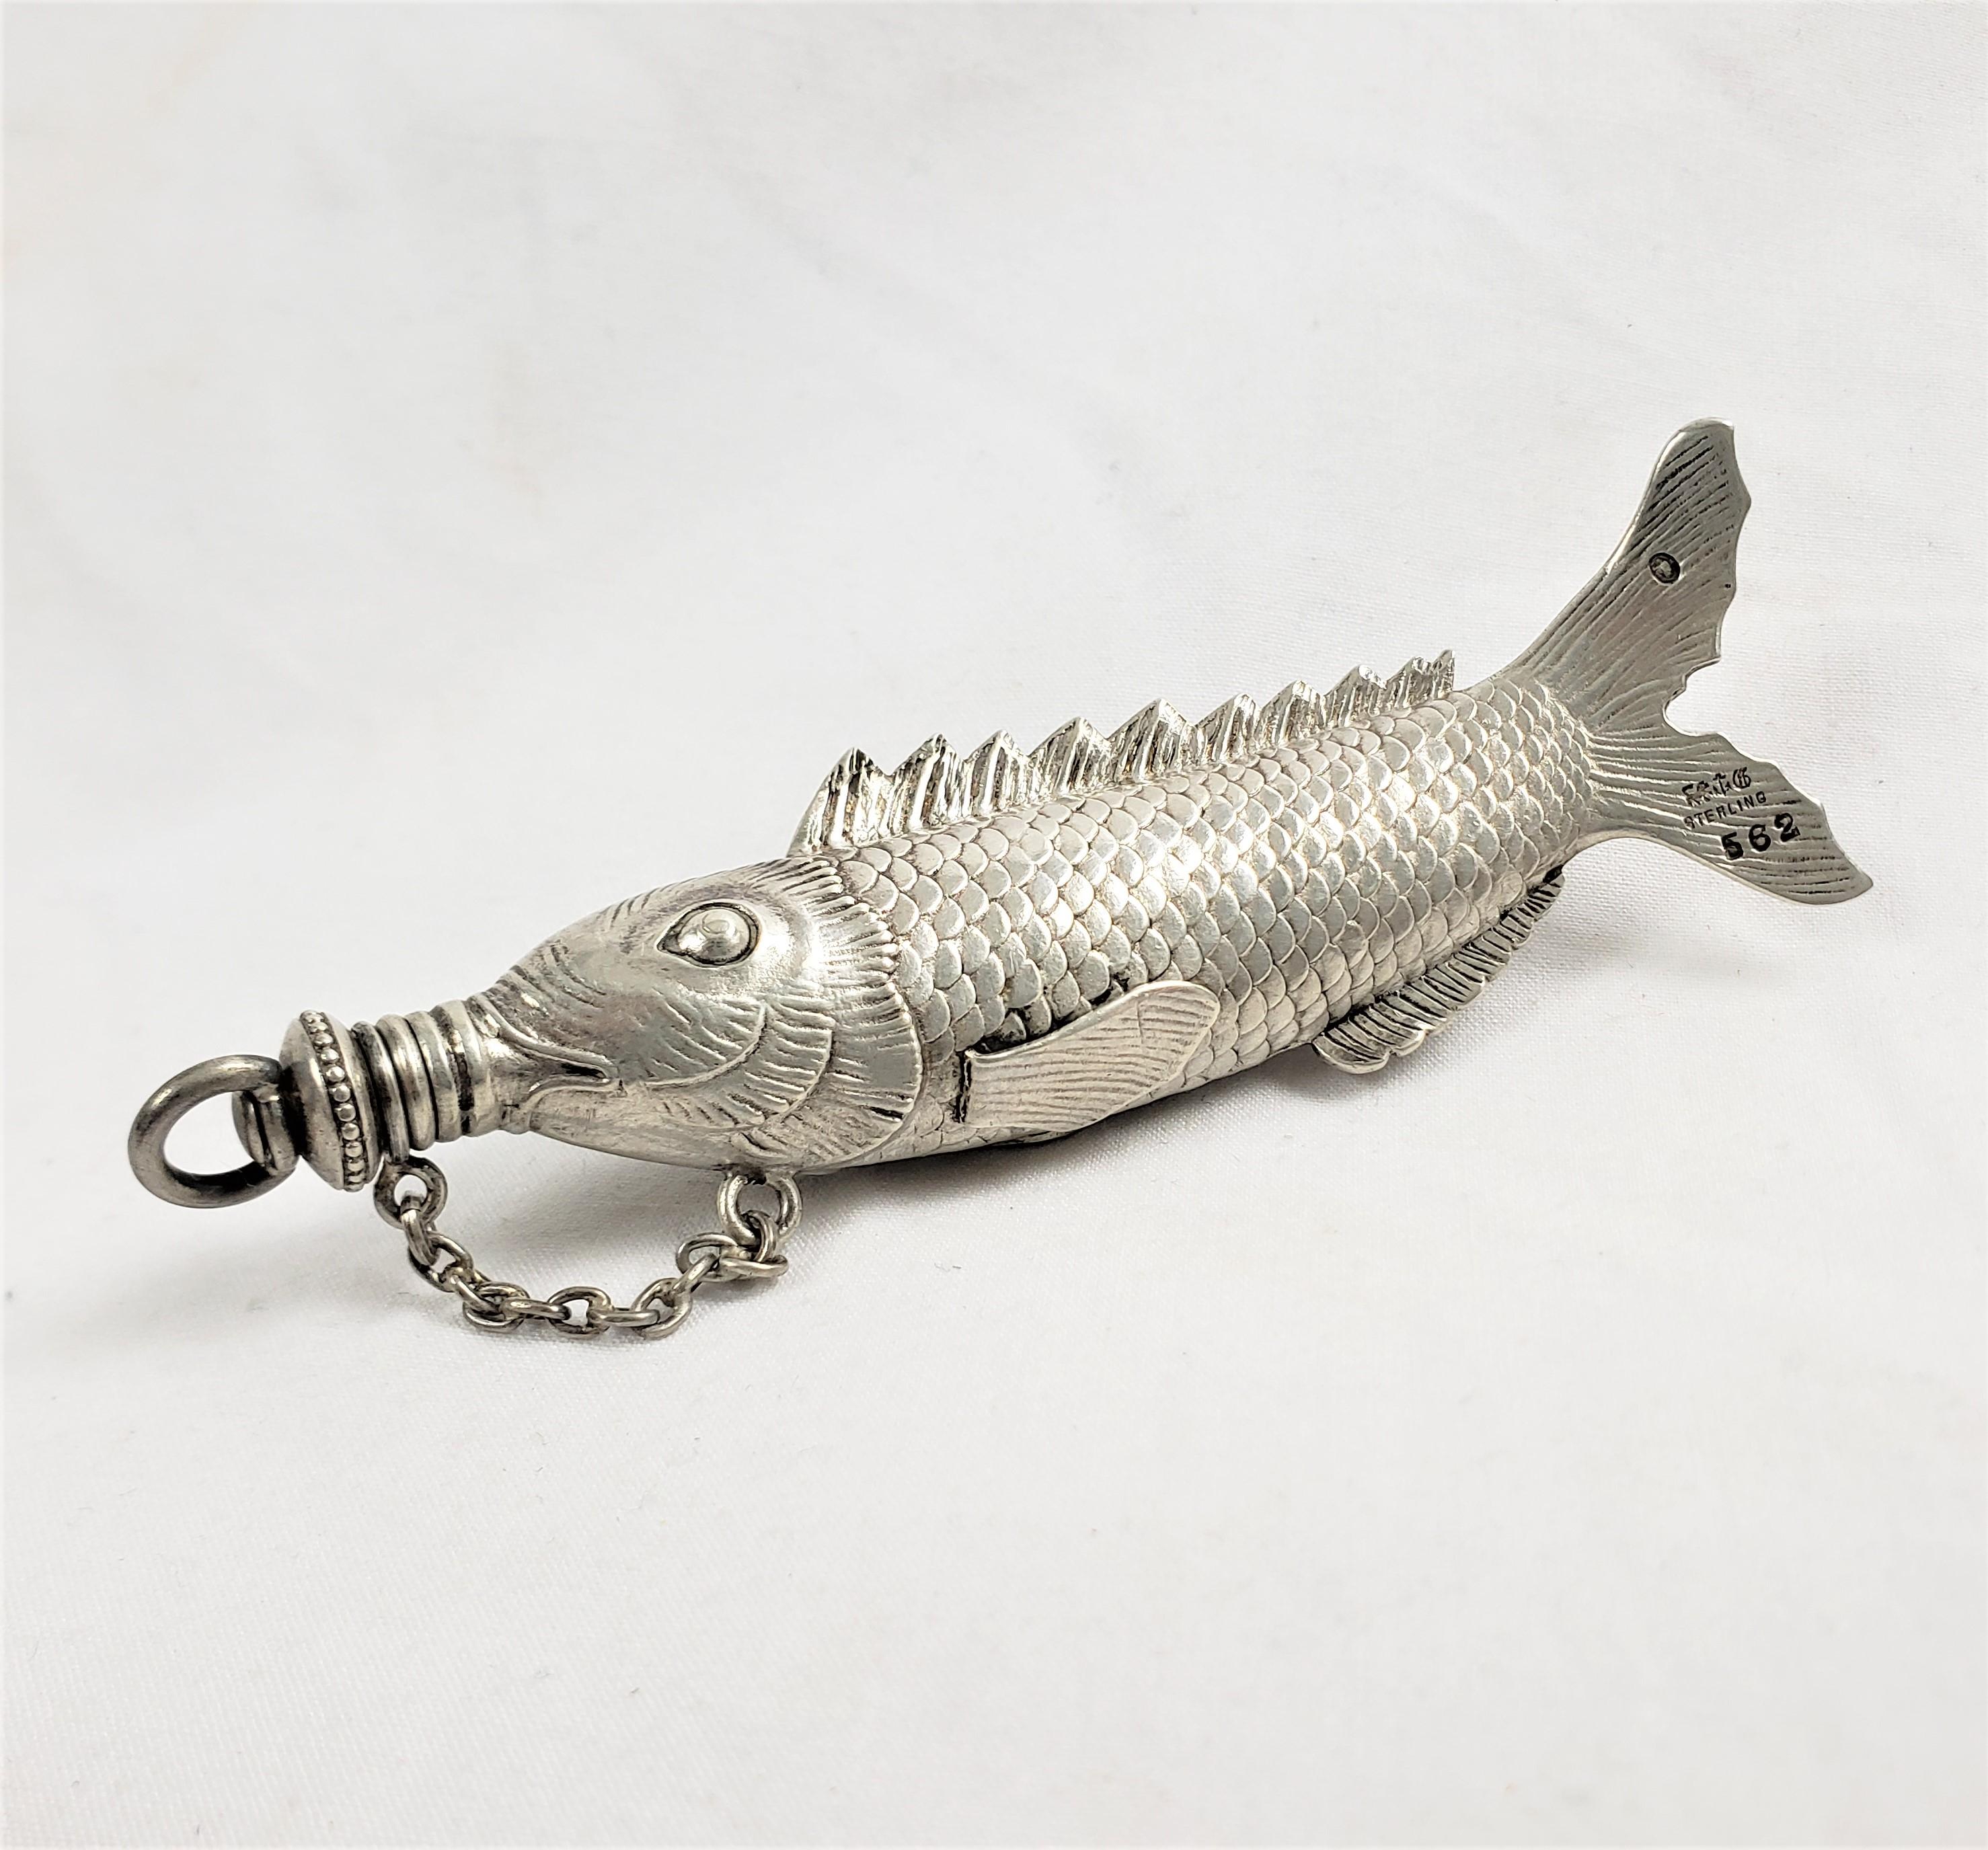 This antique perfume or scent bottle was made by the well known Gorham Co. of the United States in approximately 1880 in the period Victorian style. The bottle is composed of sterling silver and is an ornately made figural fish with a threaded